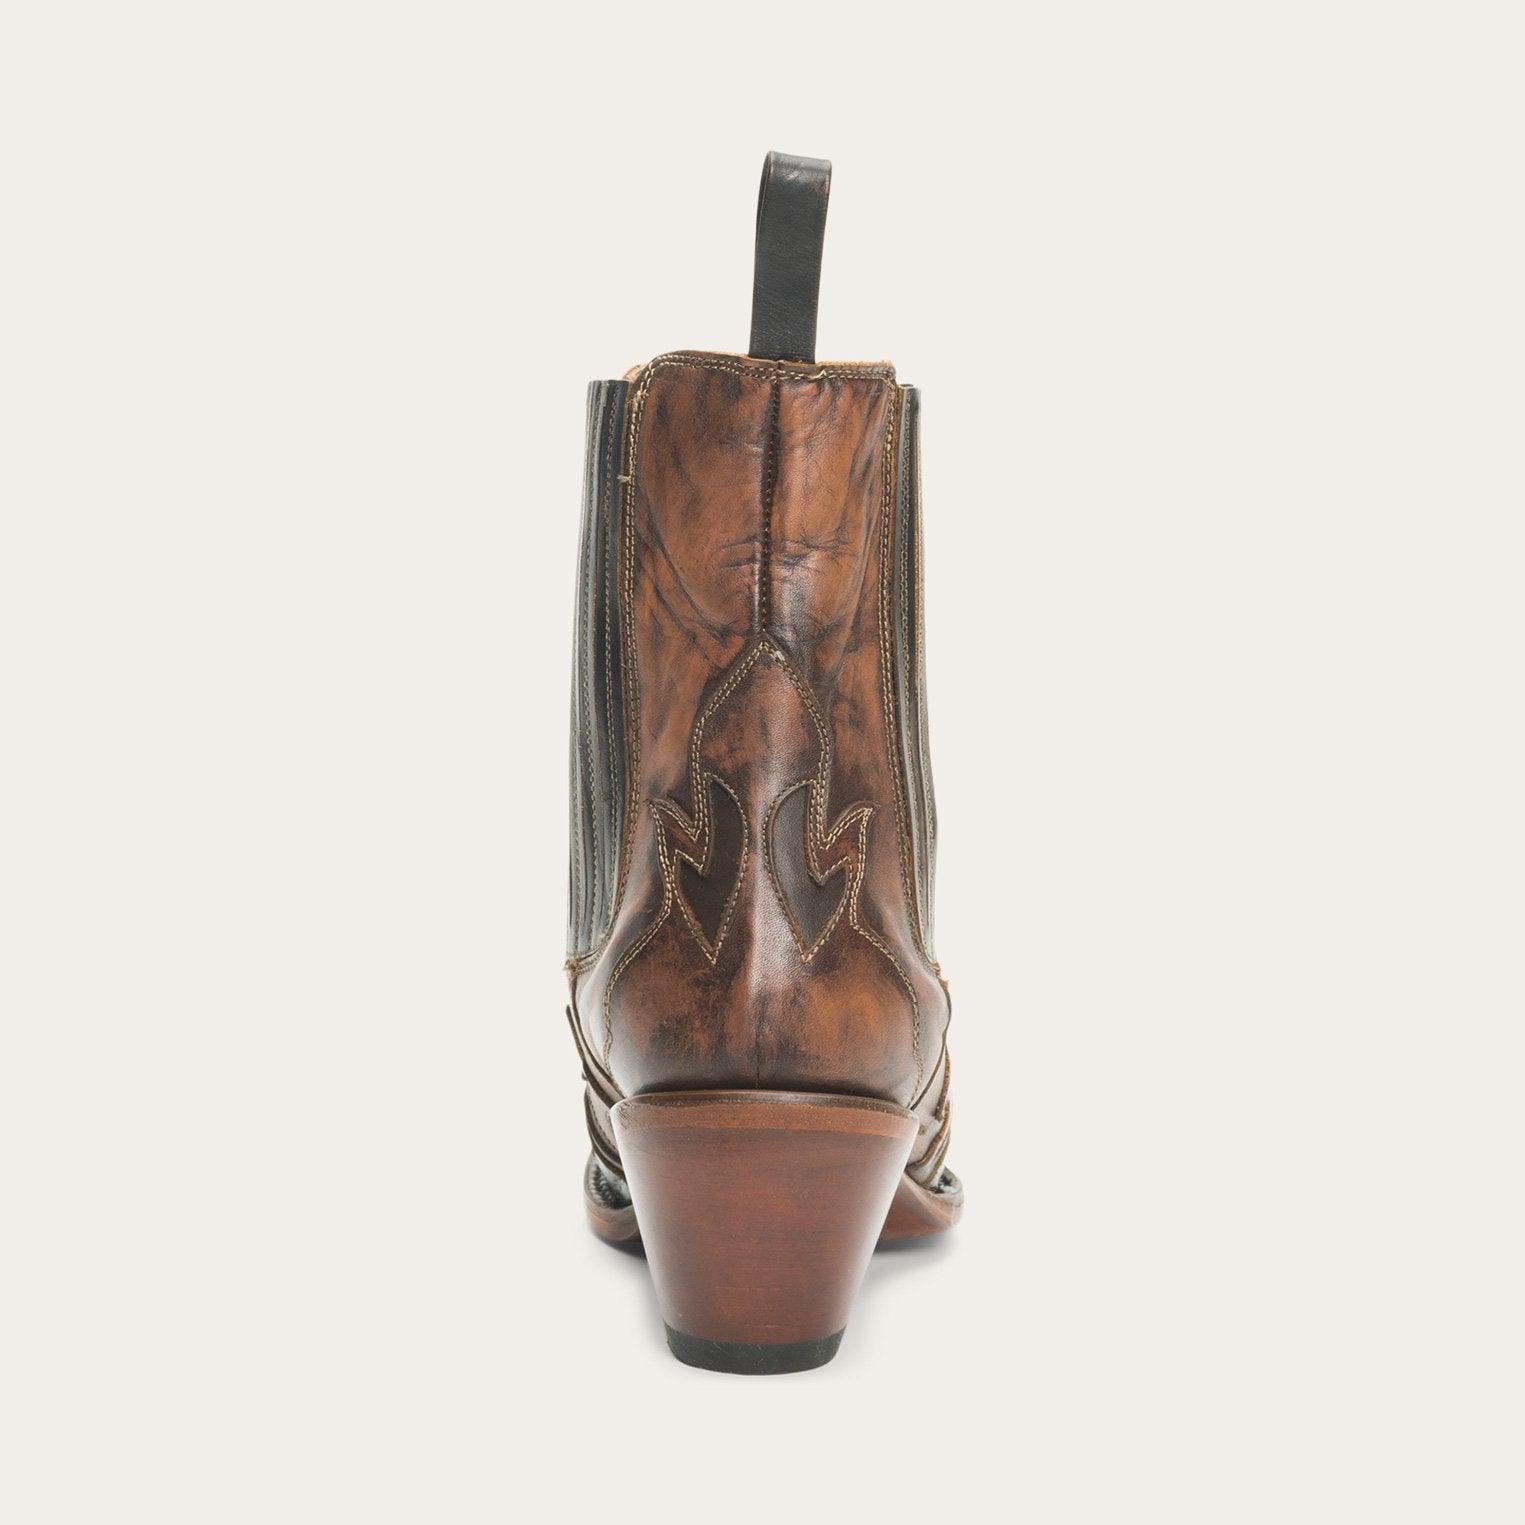 Stetson Cici Boots - Flyclothing LLC